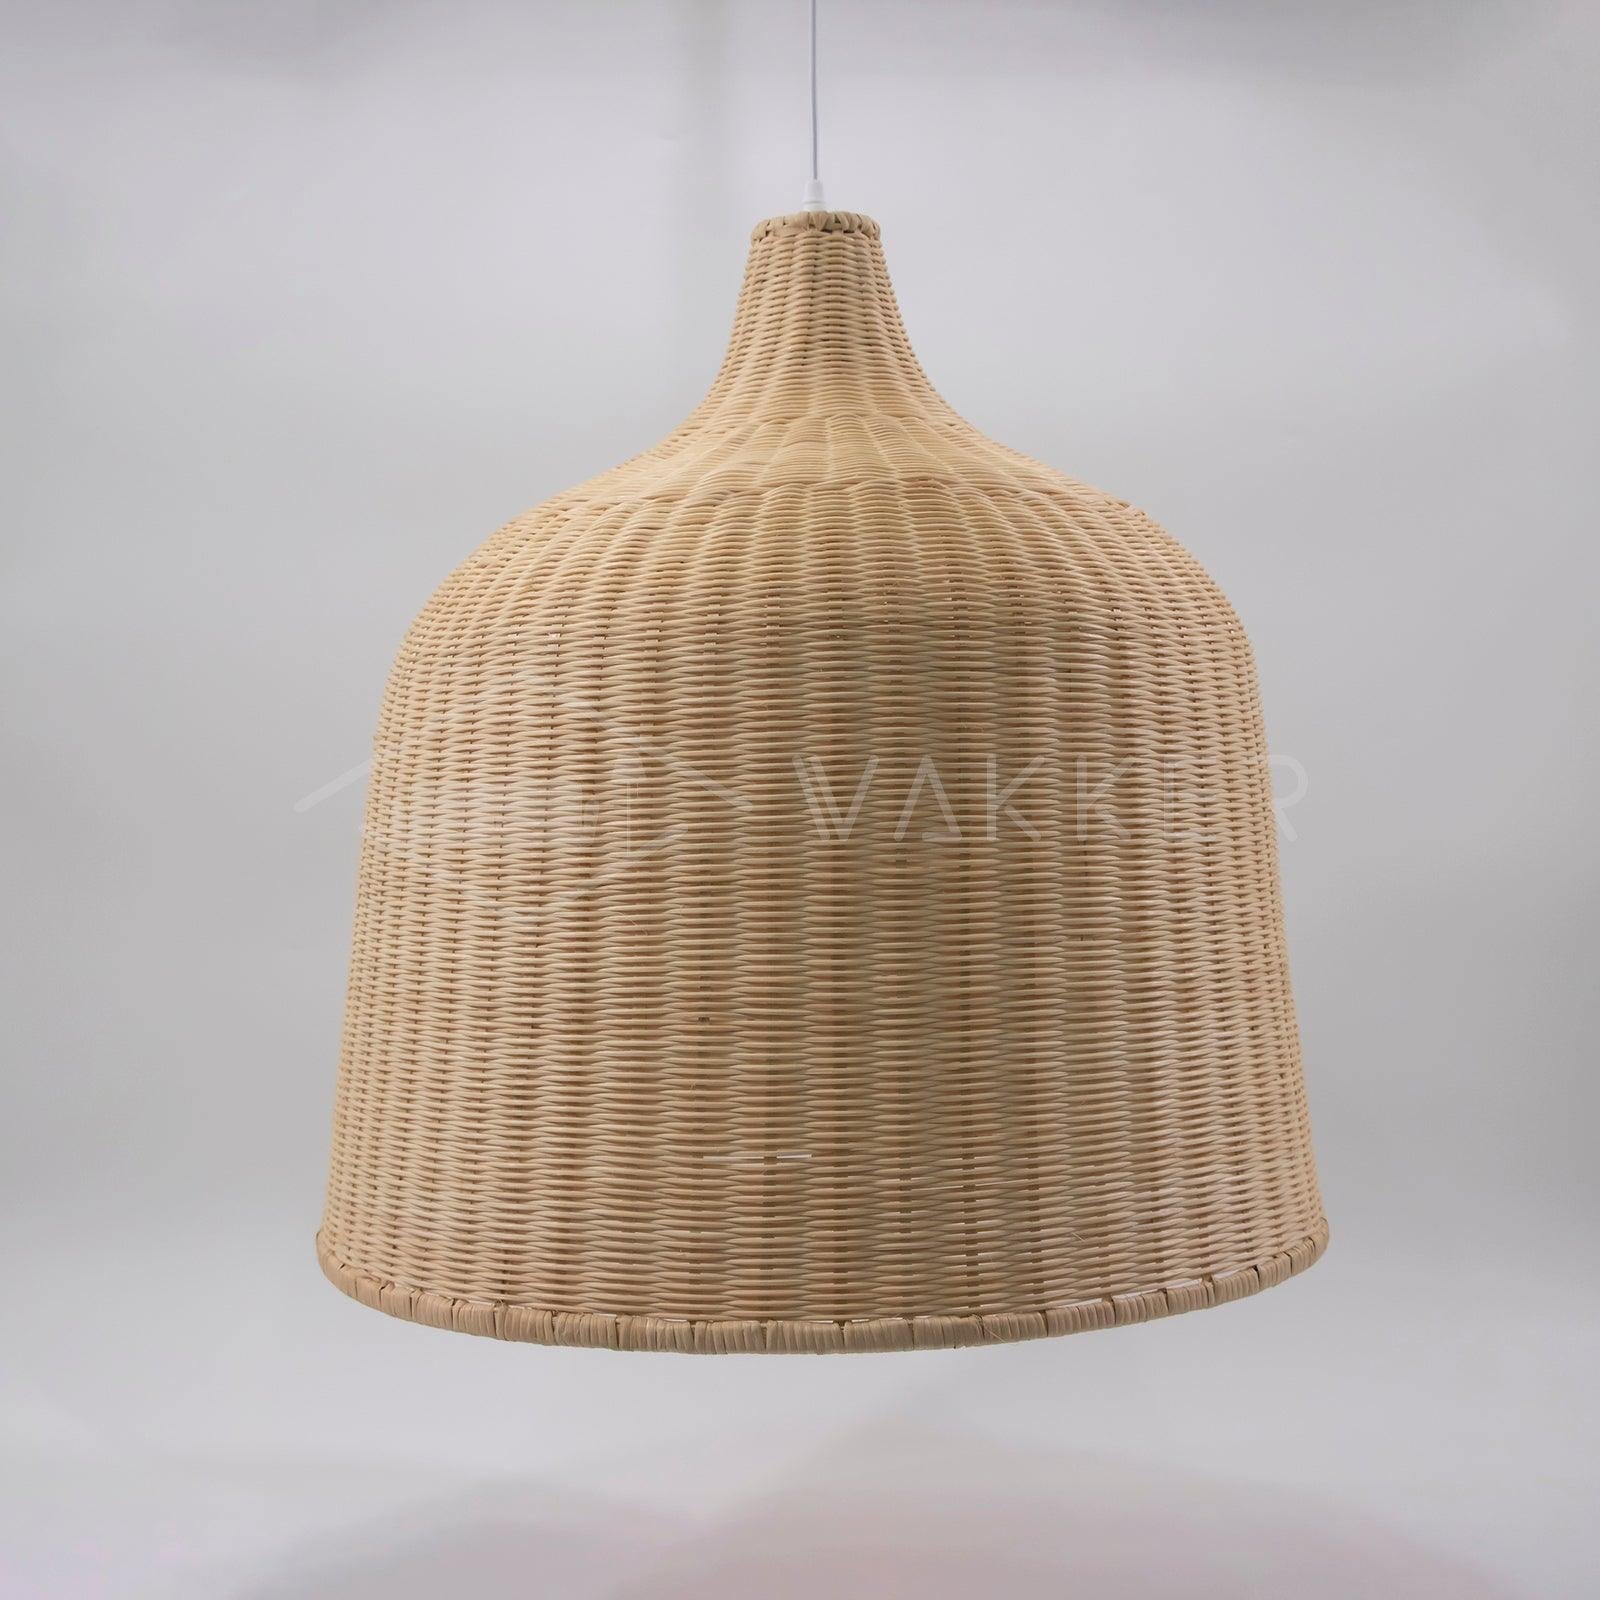 Rattan Pendant Light with a Diameter of 13.8 inches and a Height of 13.8 inches (35cm x 35cm)